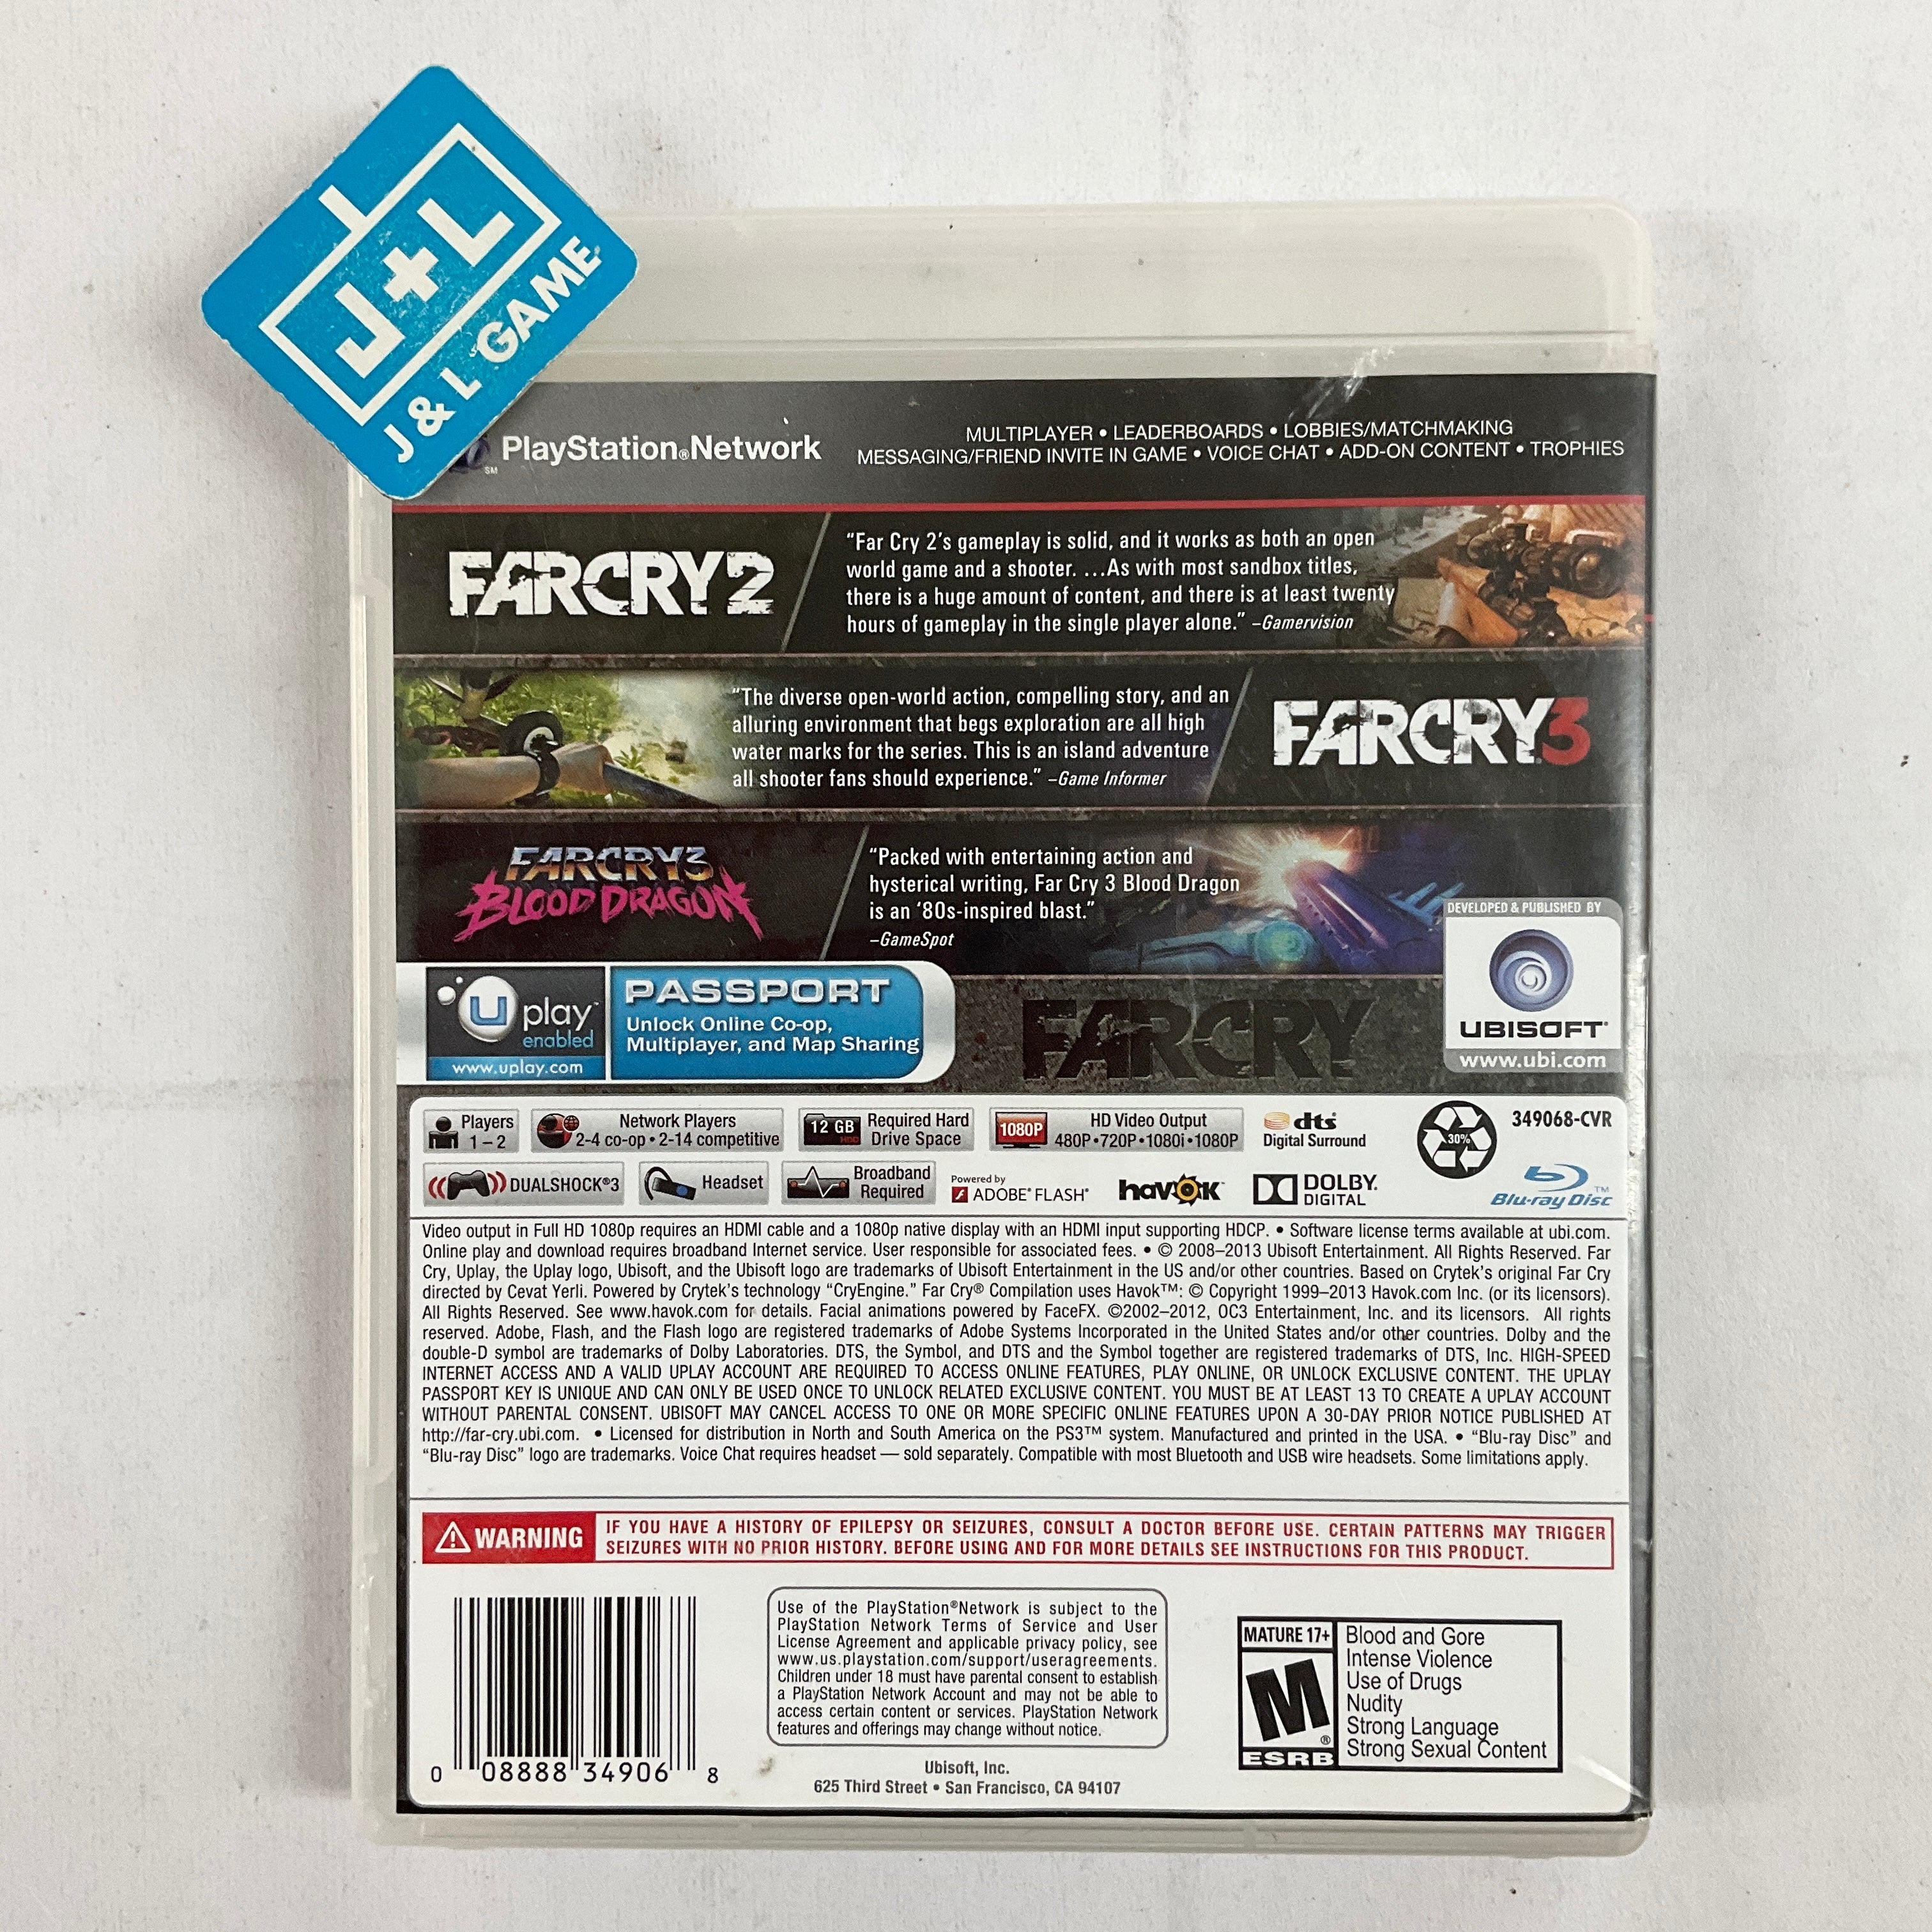 Far Cry Compilation - (PS3) PlayStation 3 [Pre-Owned] Video Games Ubisoft   